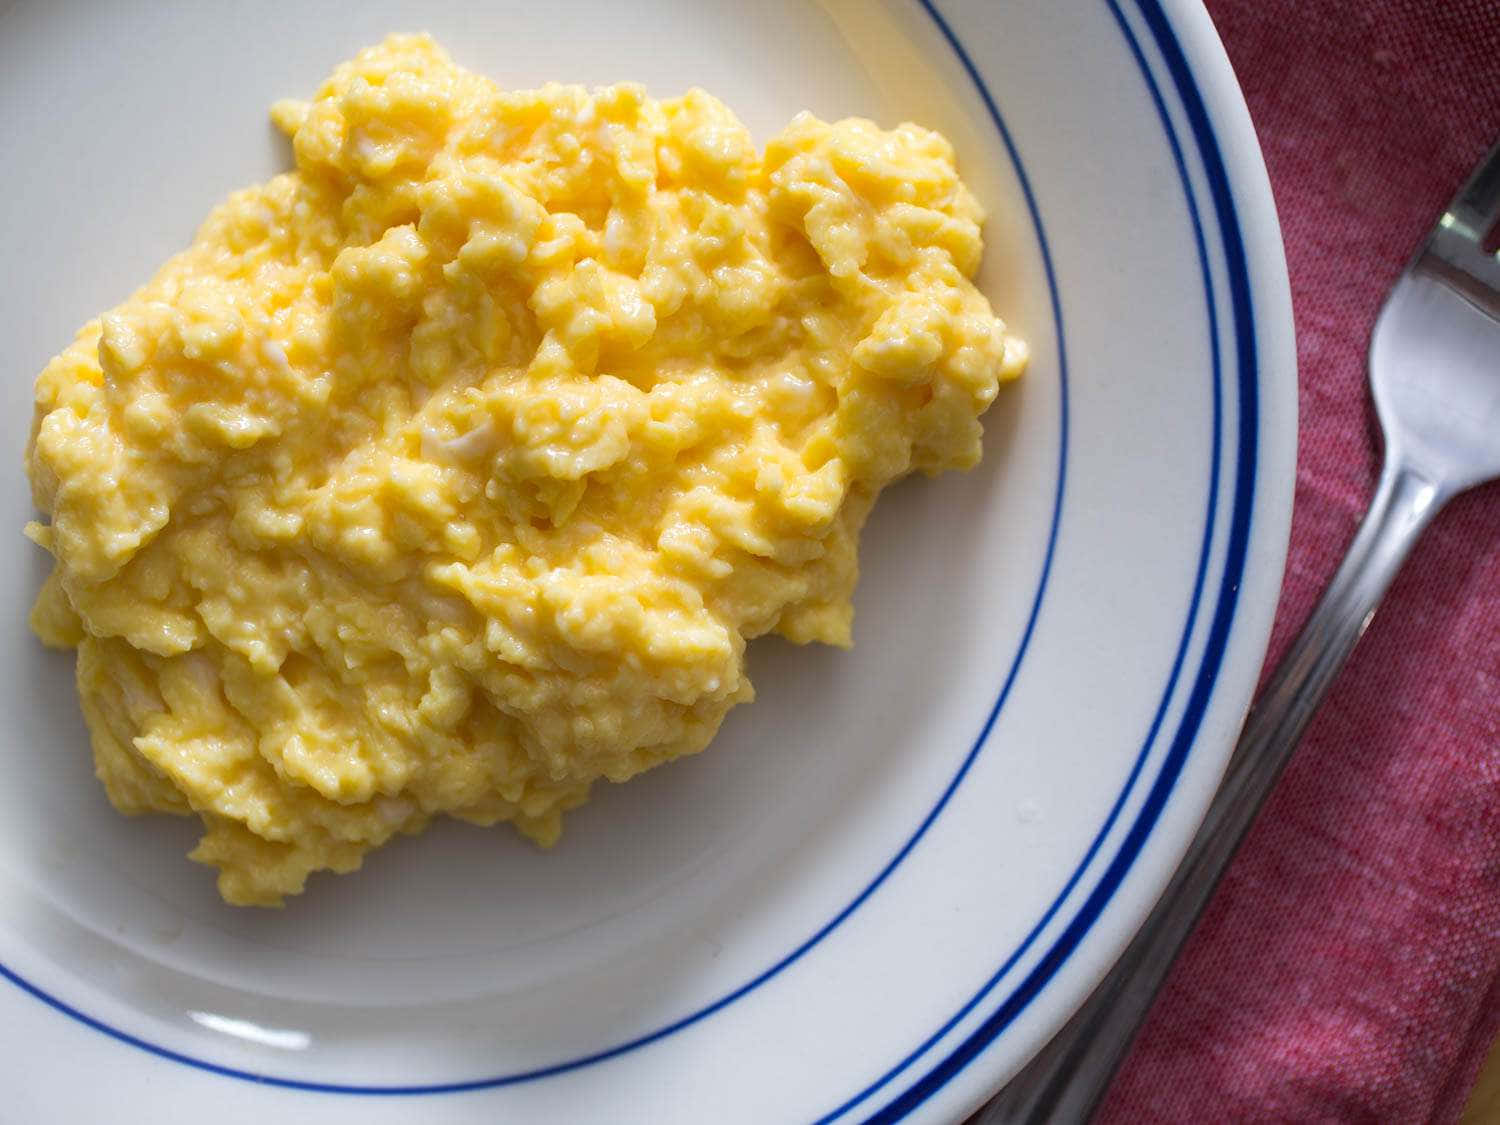 Start your day with a tasty and nutritious scramble egg meal!